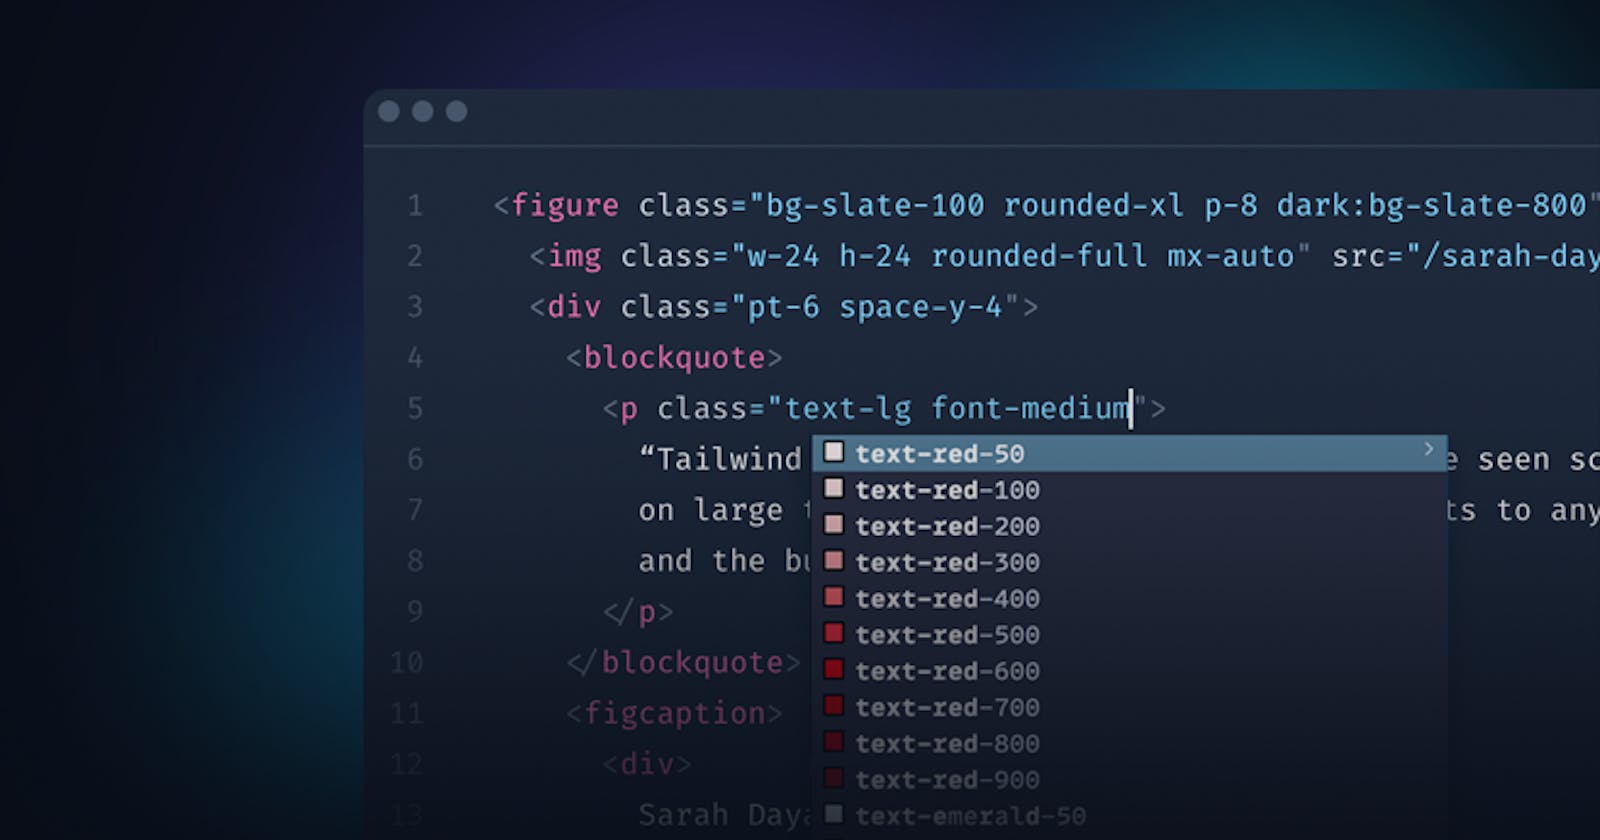 Enable Autocomplete for Tailwind CSS in VSCode